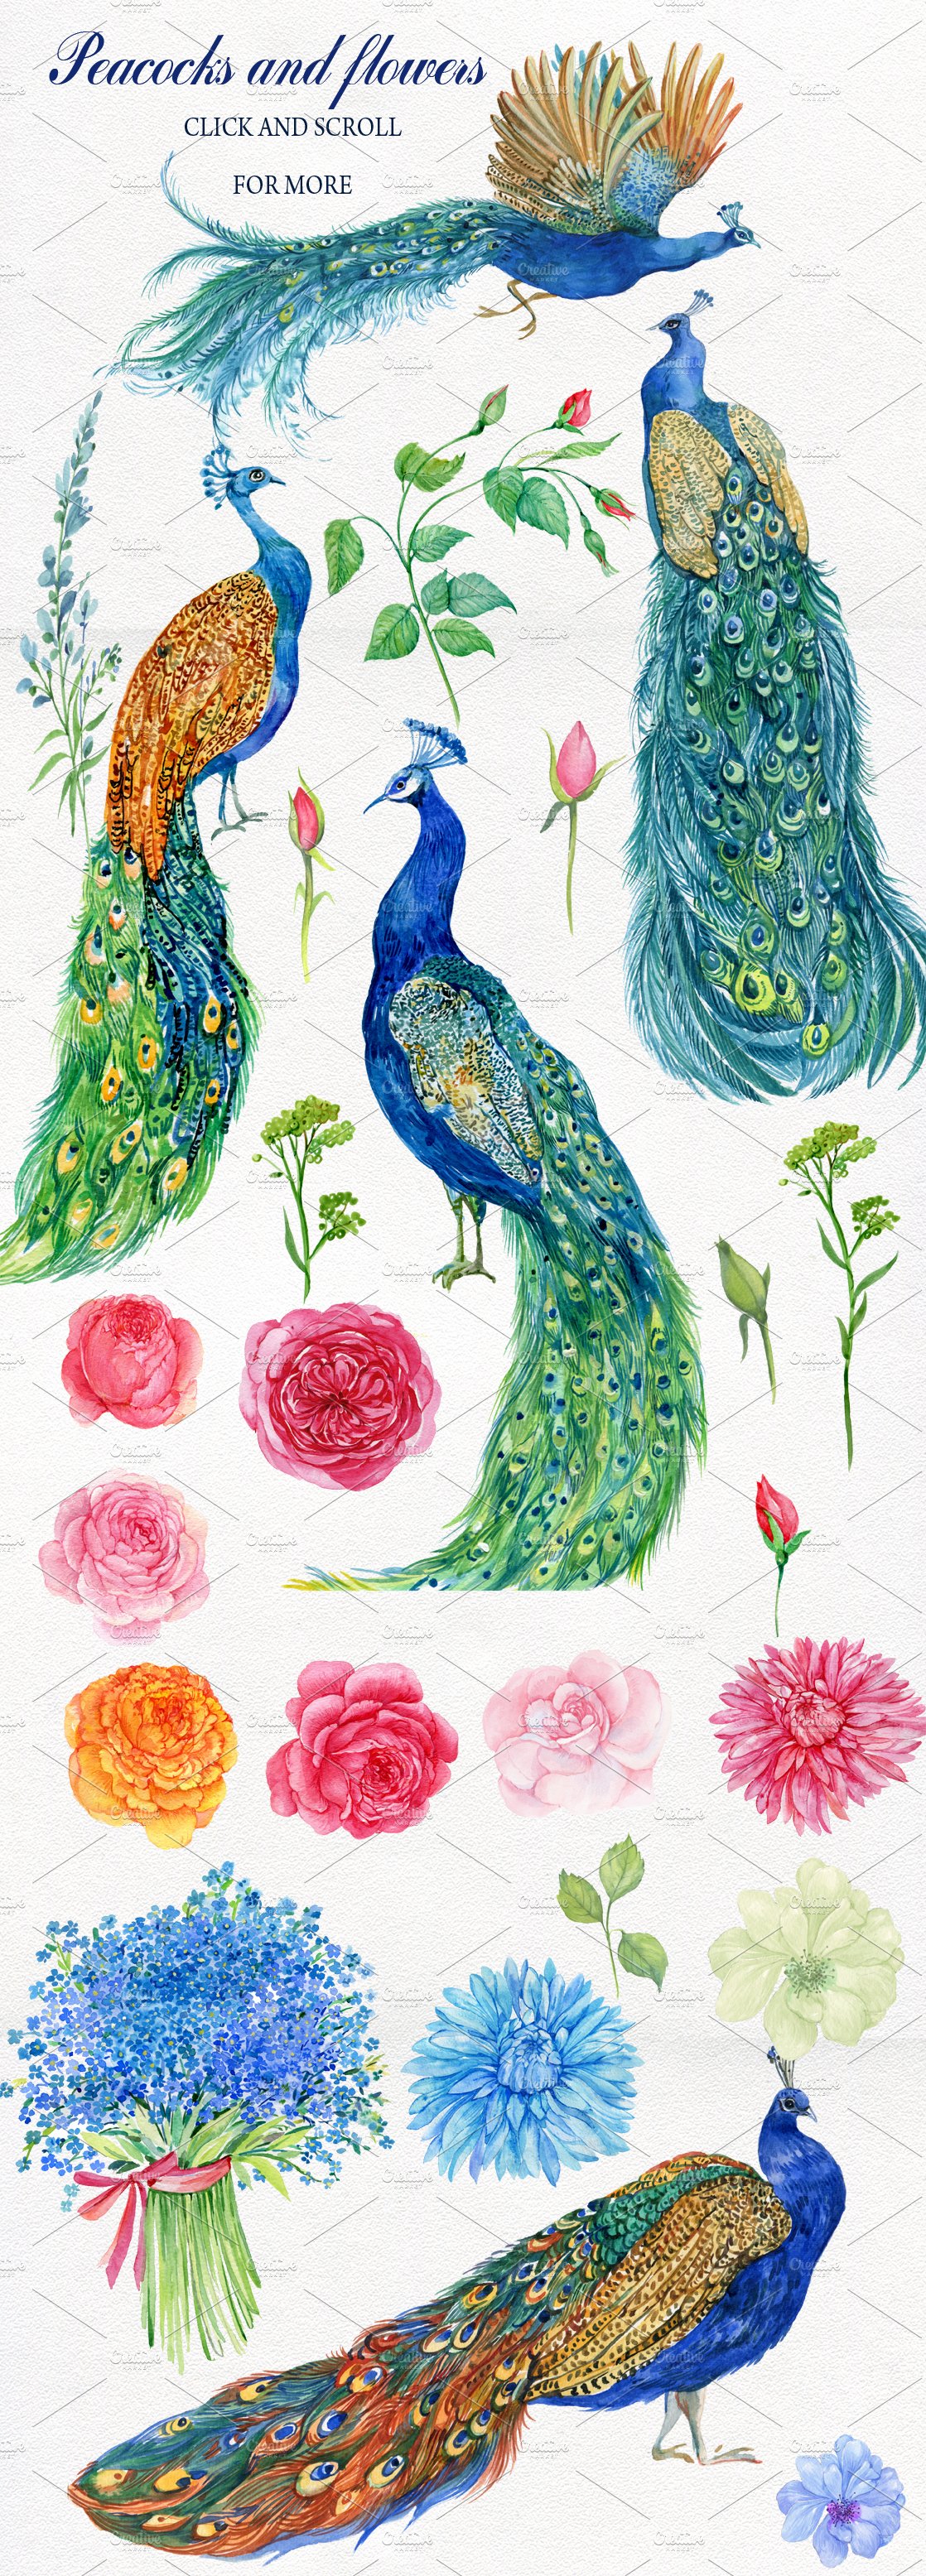 Peacocks and flowers/watercolor preview image.